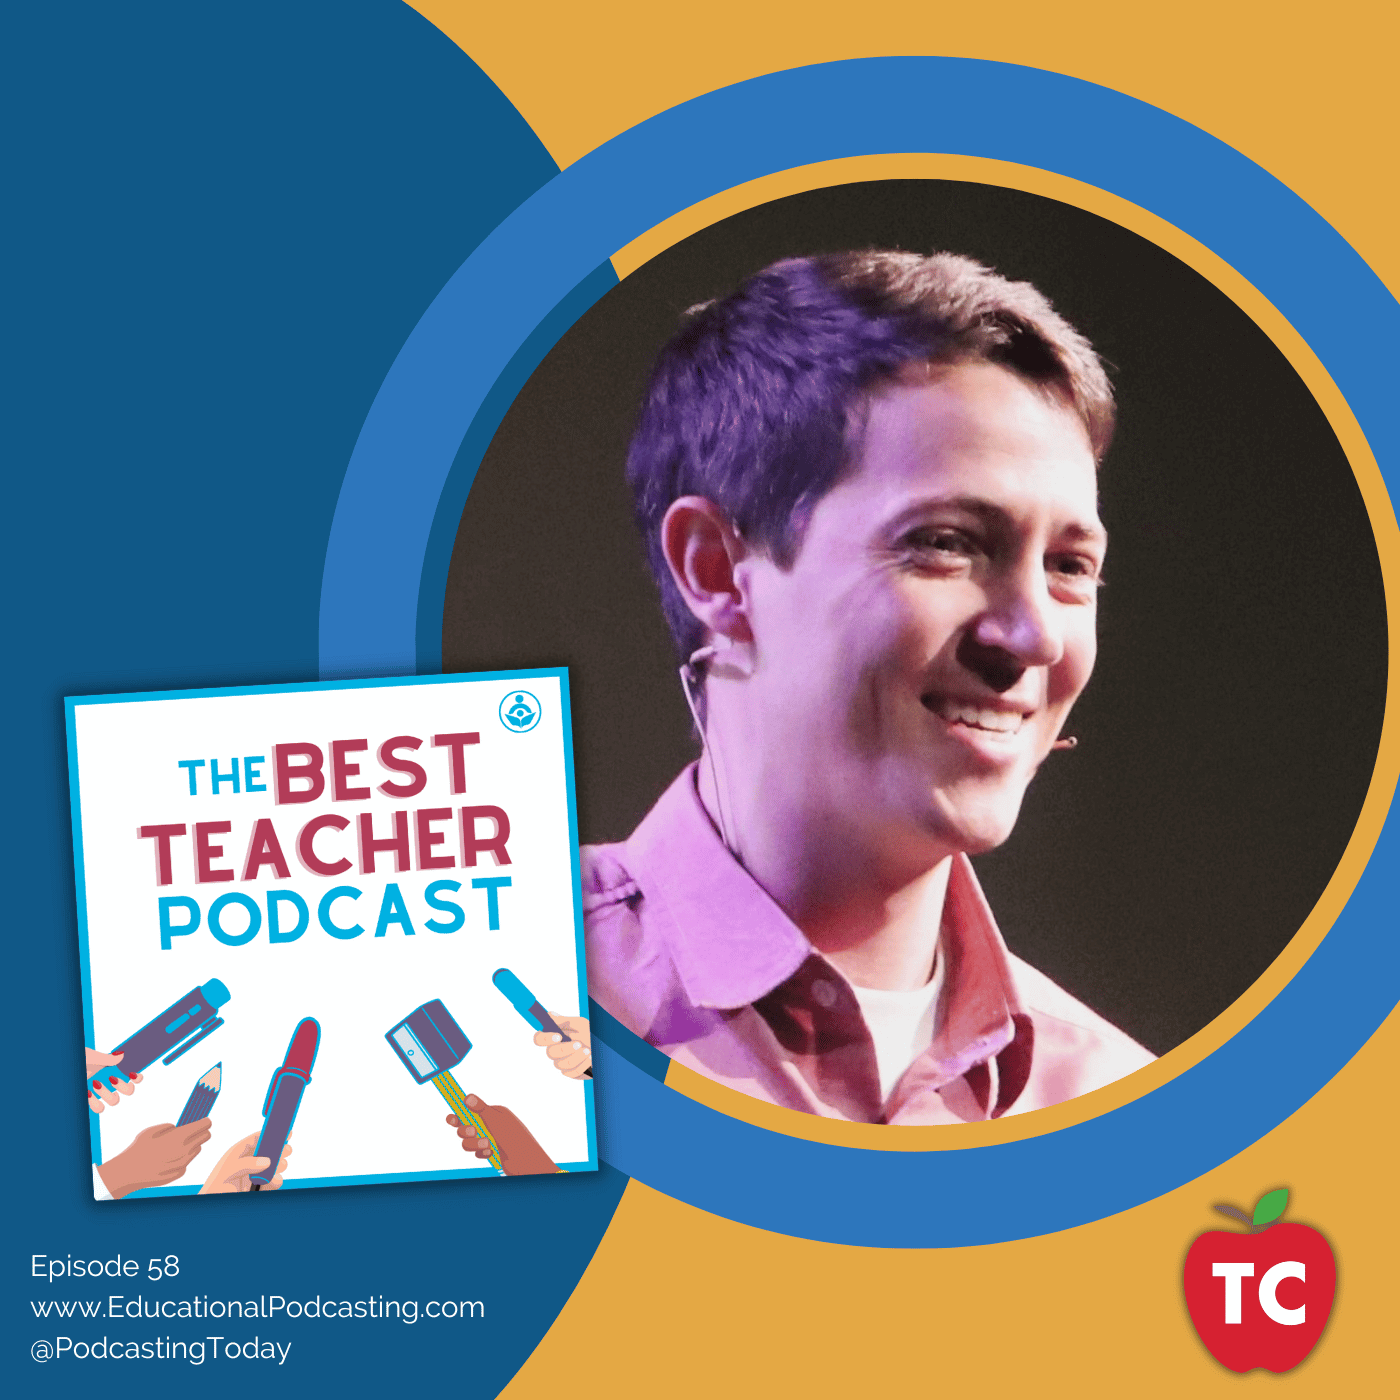 What is The Best Teacher Podcast? A Conversation with Grant Wootten